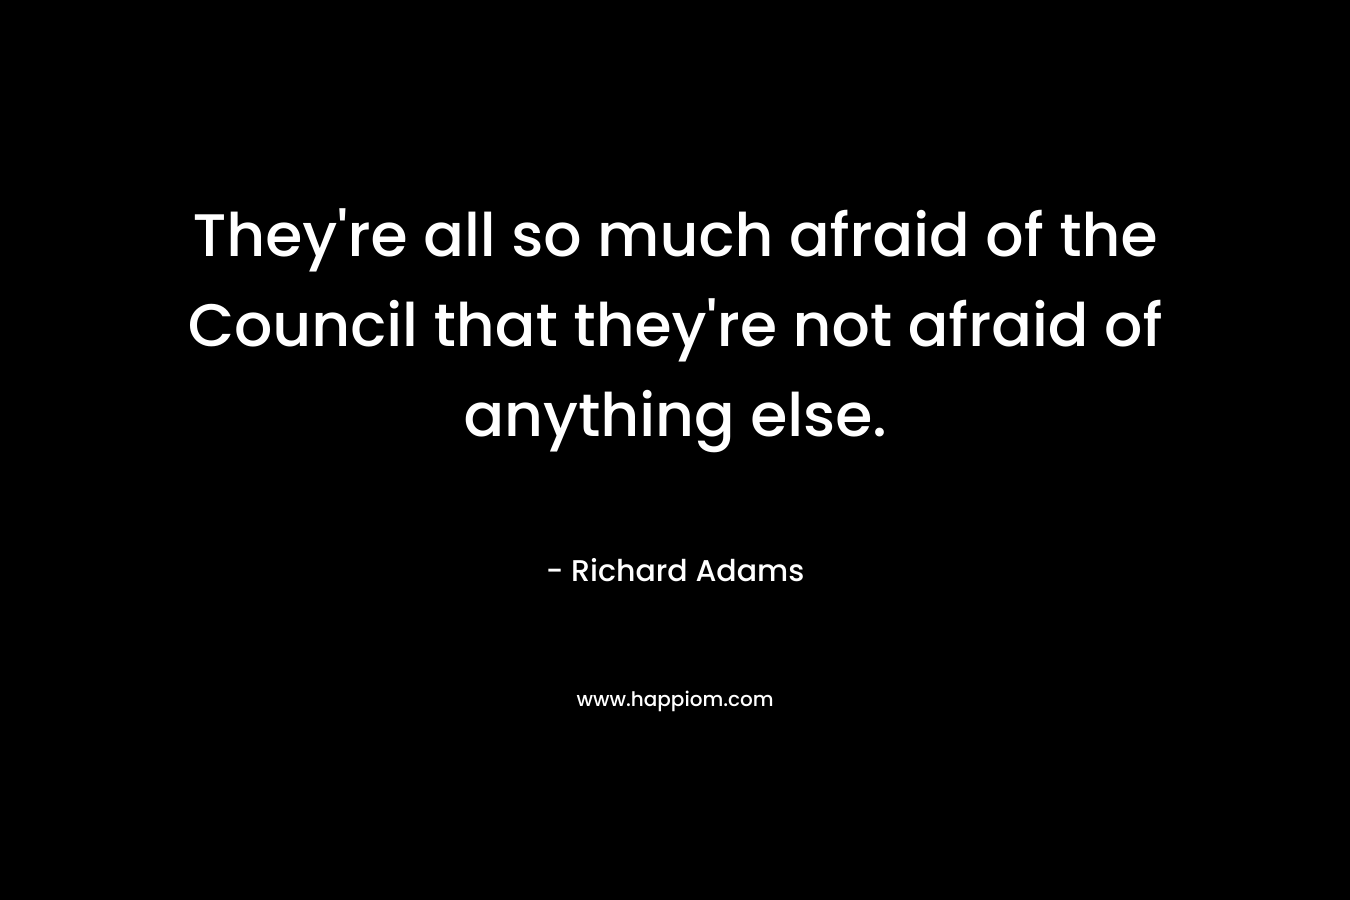 They're all so much afraid of the Council that they're not afraid of anything else.